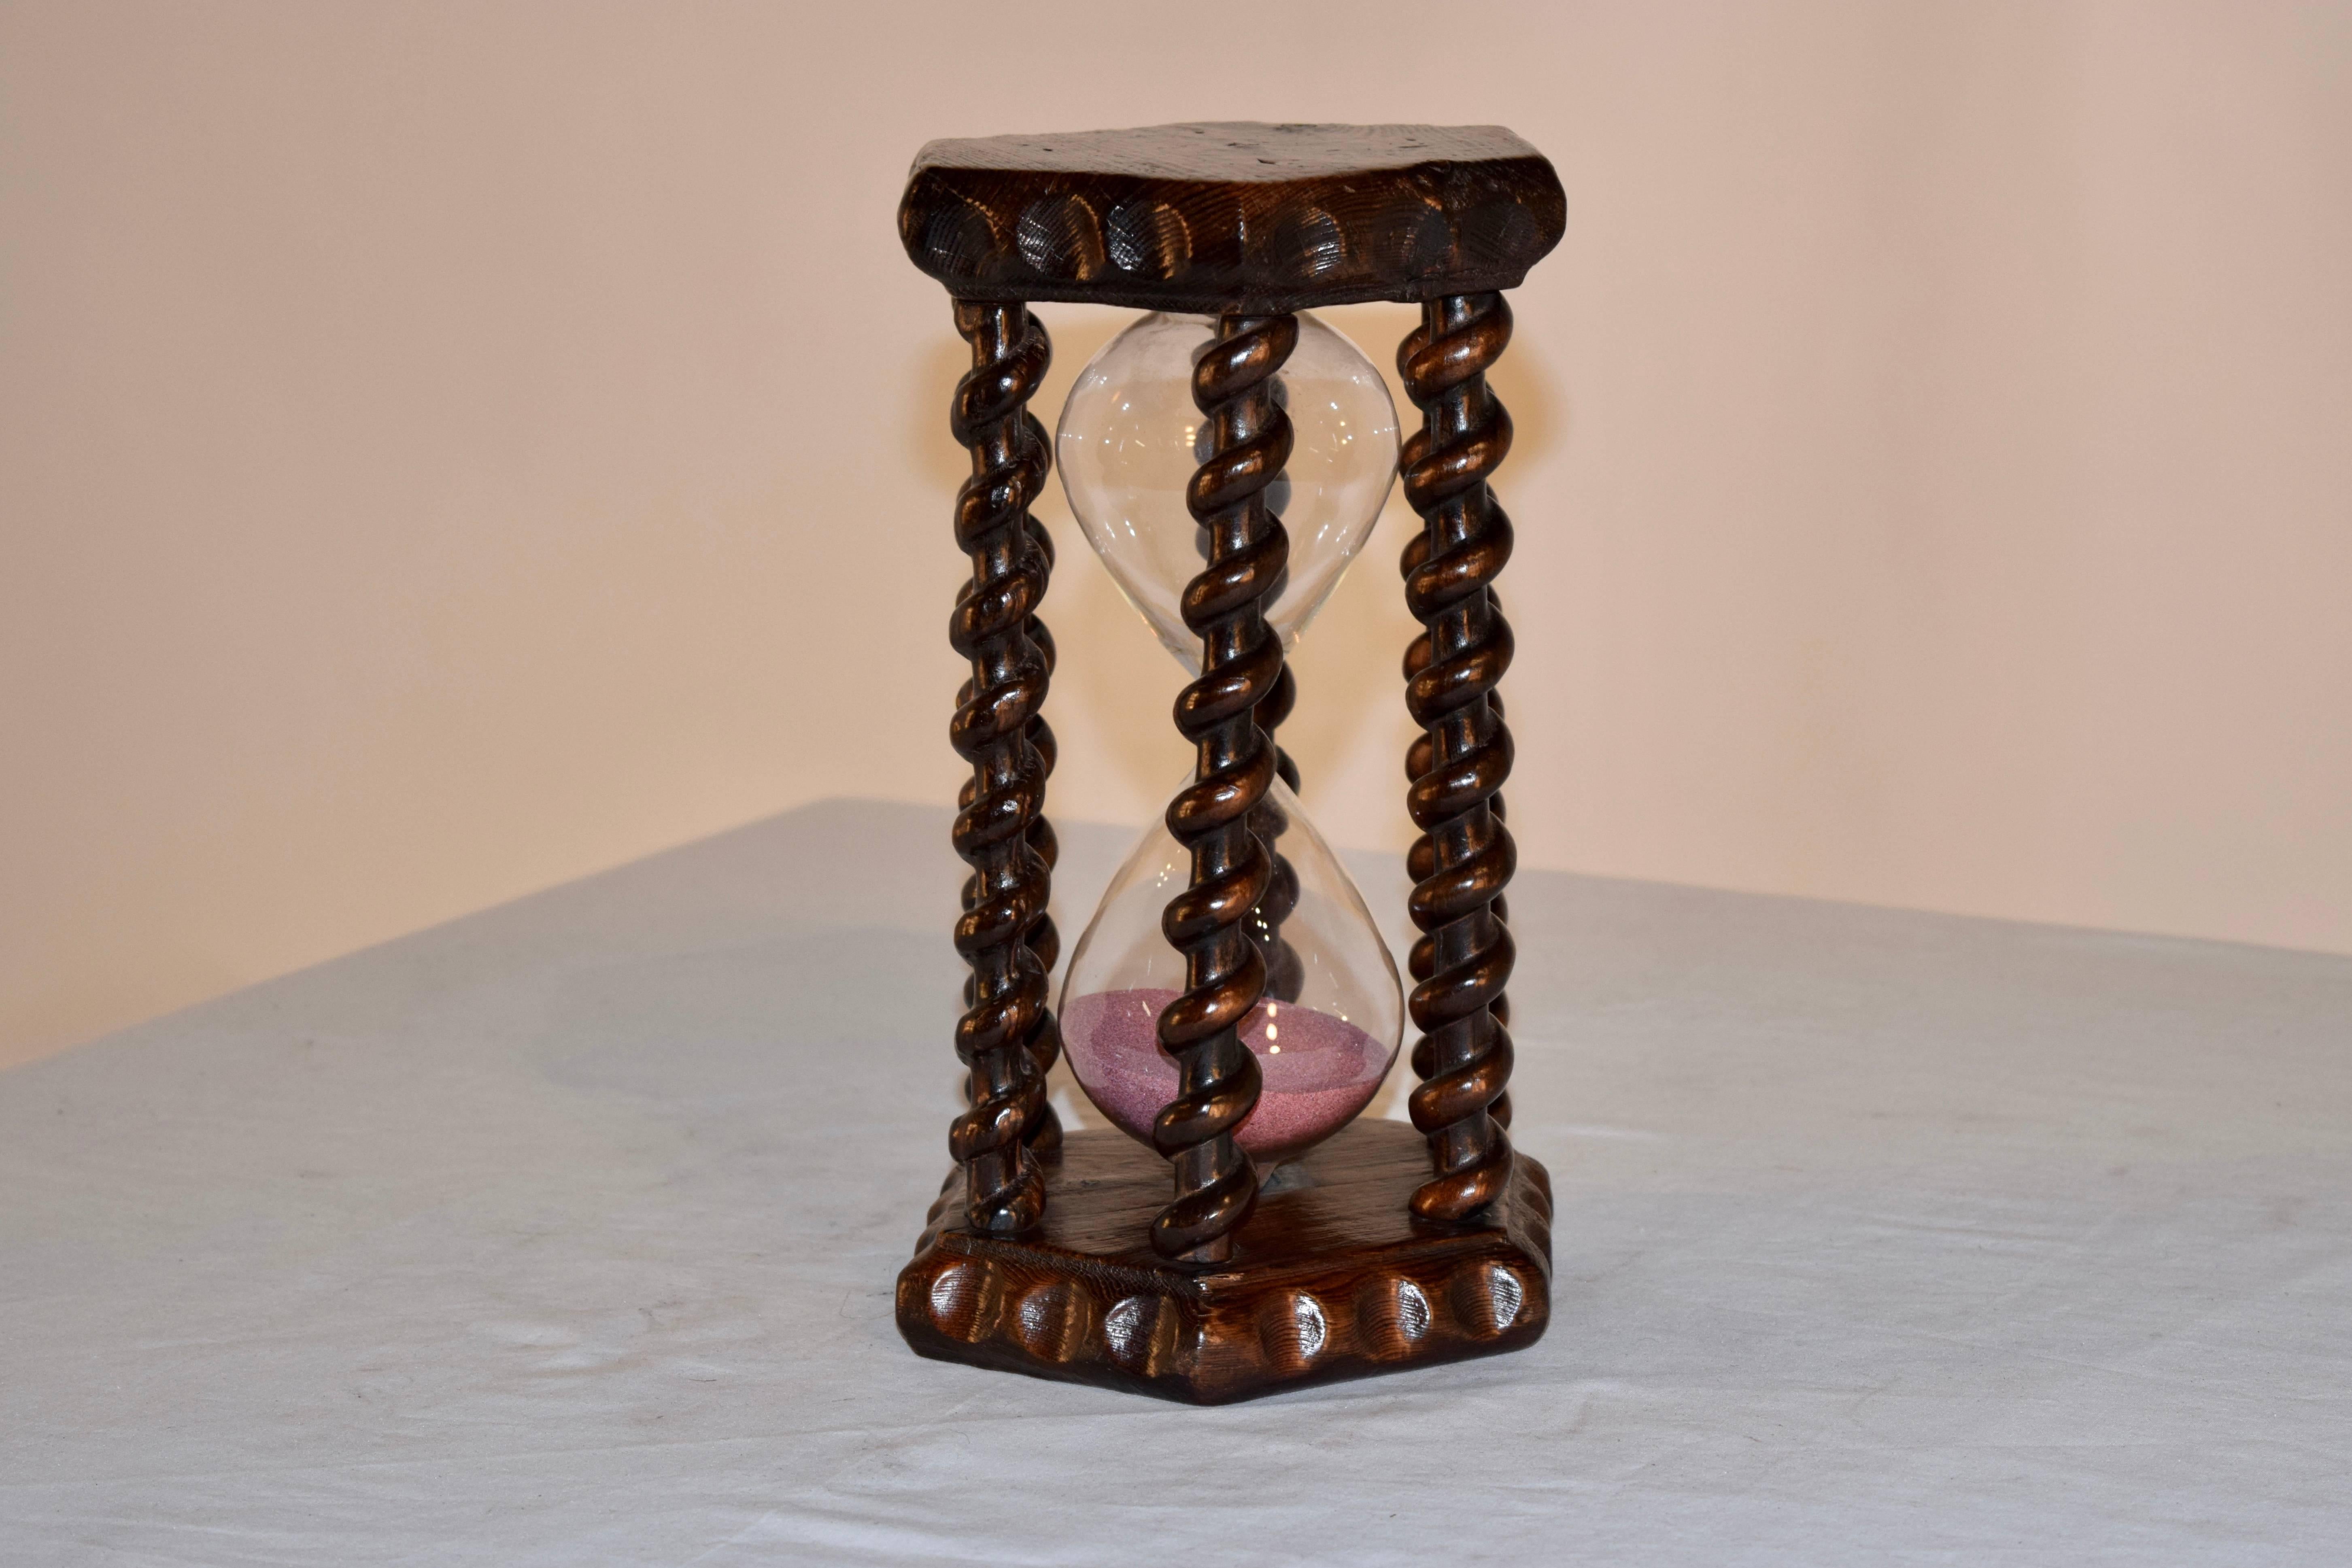 19th century English hourglass made from pine. The top and bottom have hand-carved pie crust edges and are joined together by hand-carved and turned rope twist spindles, surrounding a handblown hourglass.